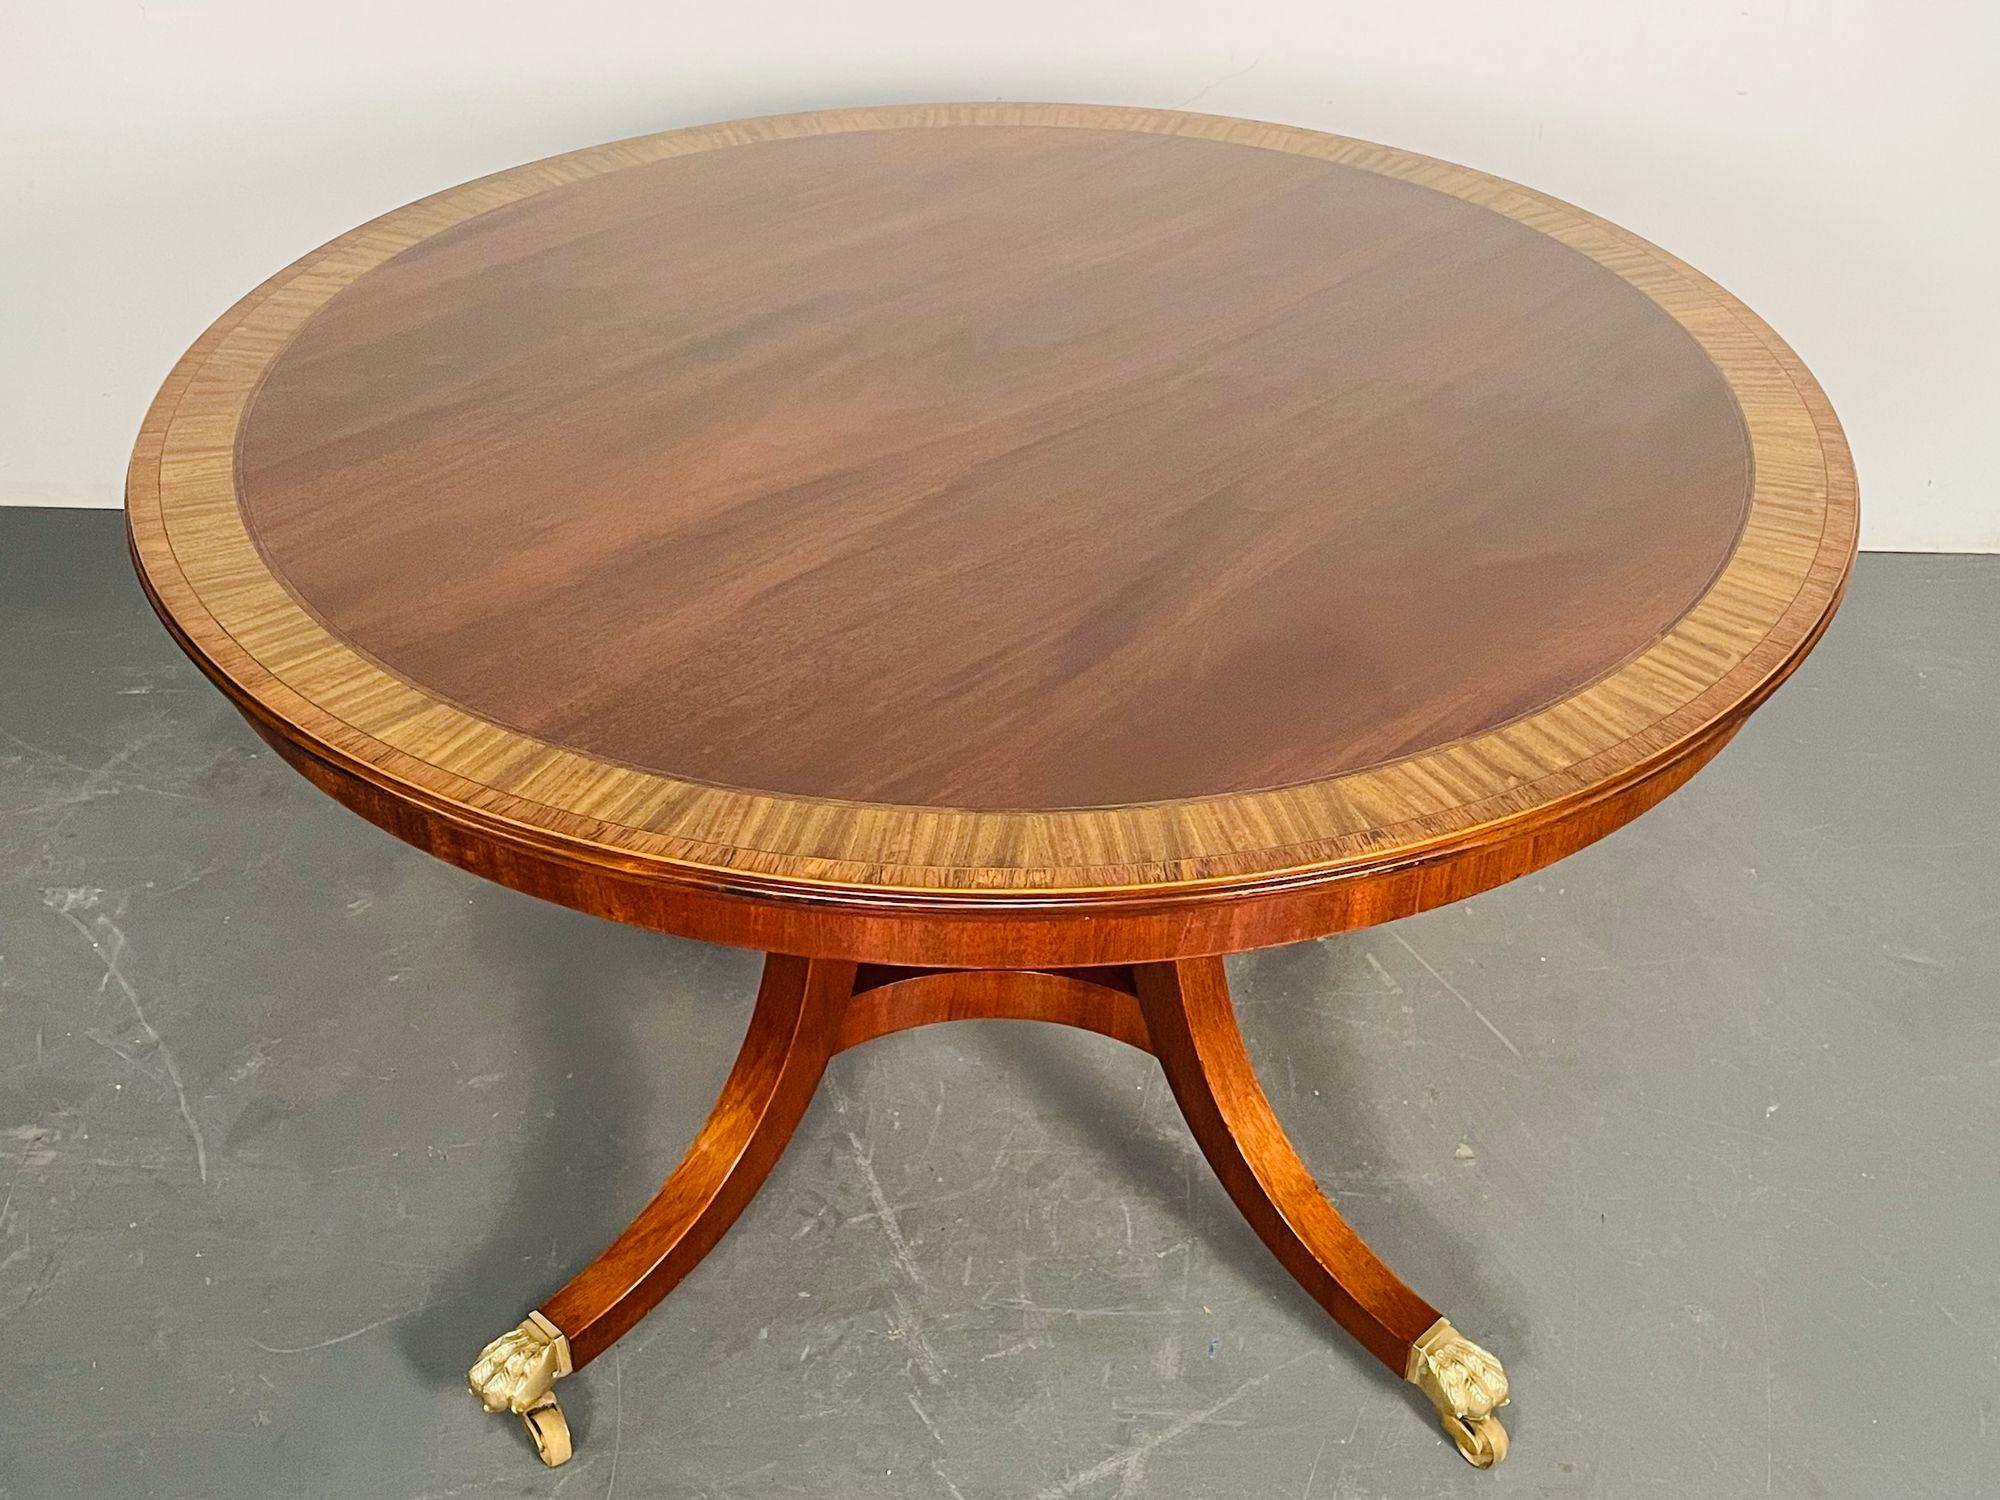 Georgian Style Mahogany Banded Center Dining Table, By William Tillman, Fully Refinished with Leaves


William Tillman mahogany and satinwood banded dining or center table having five leaves. This fully refinished dining table manufactured by one of